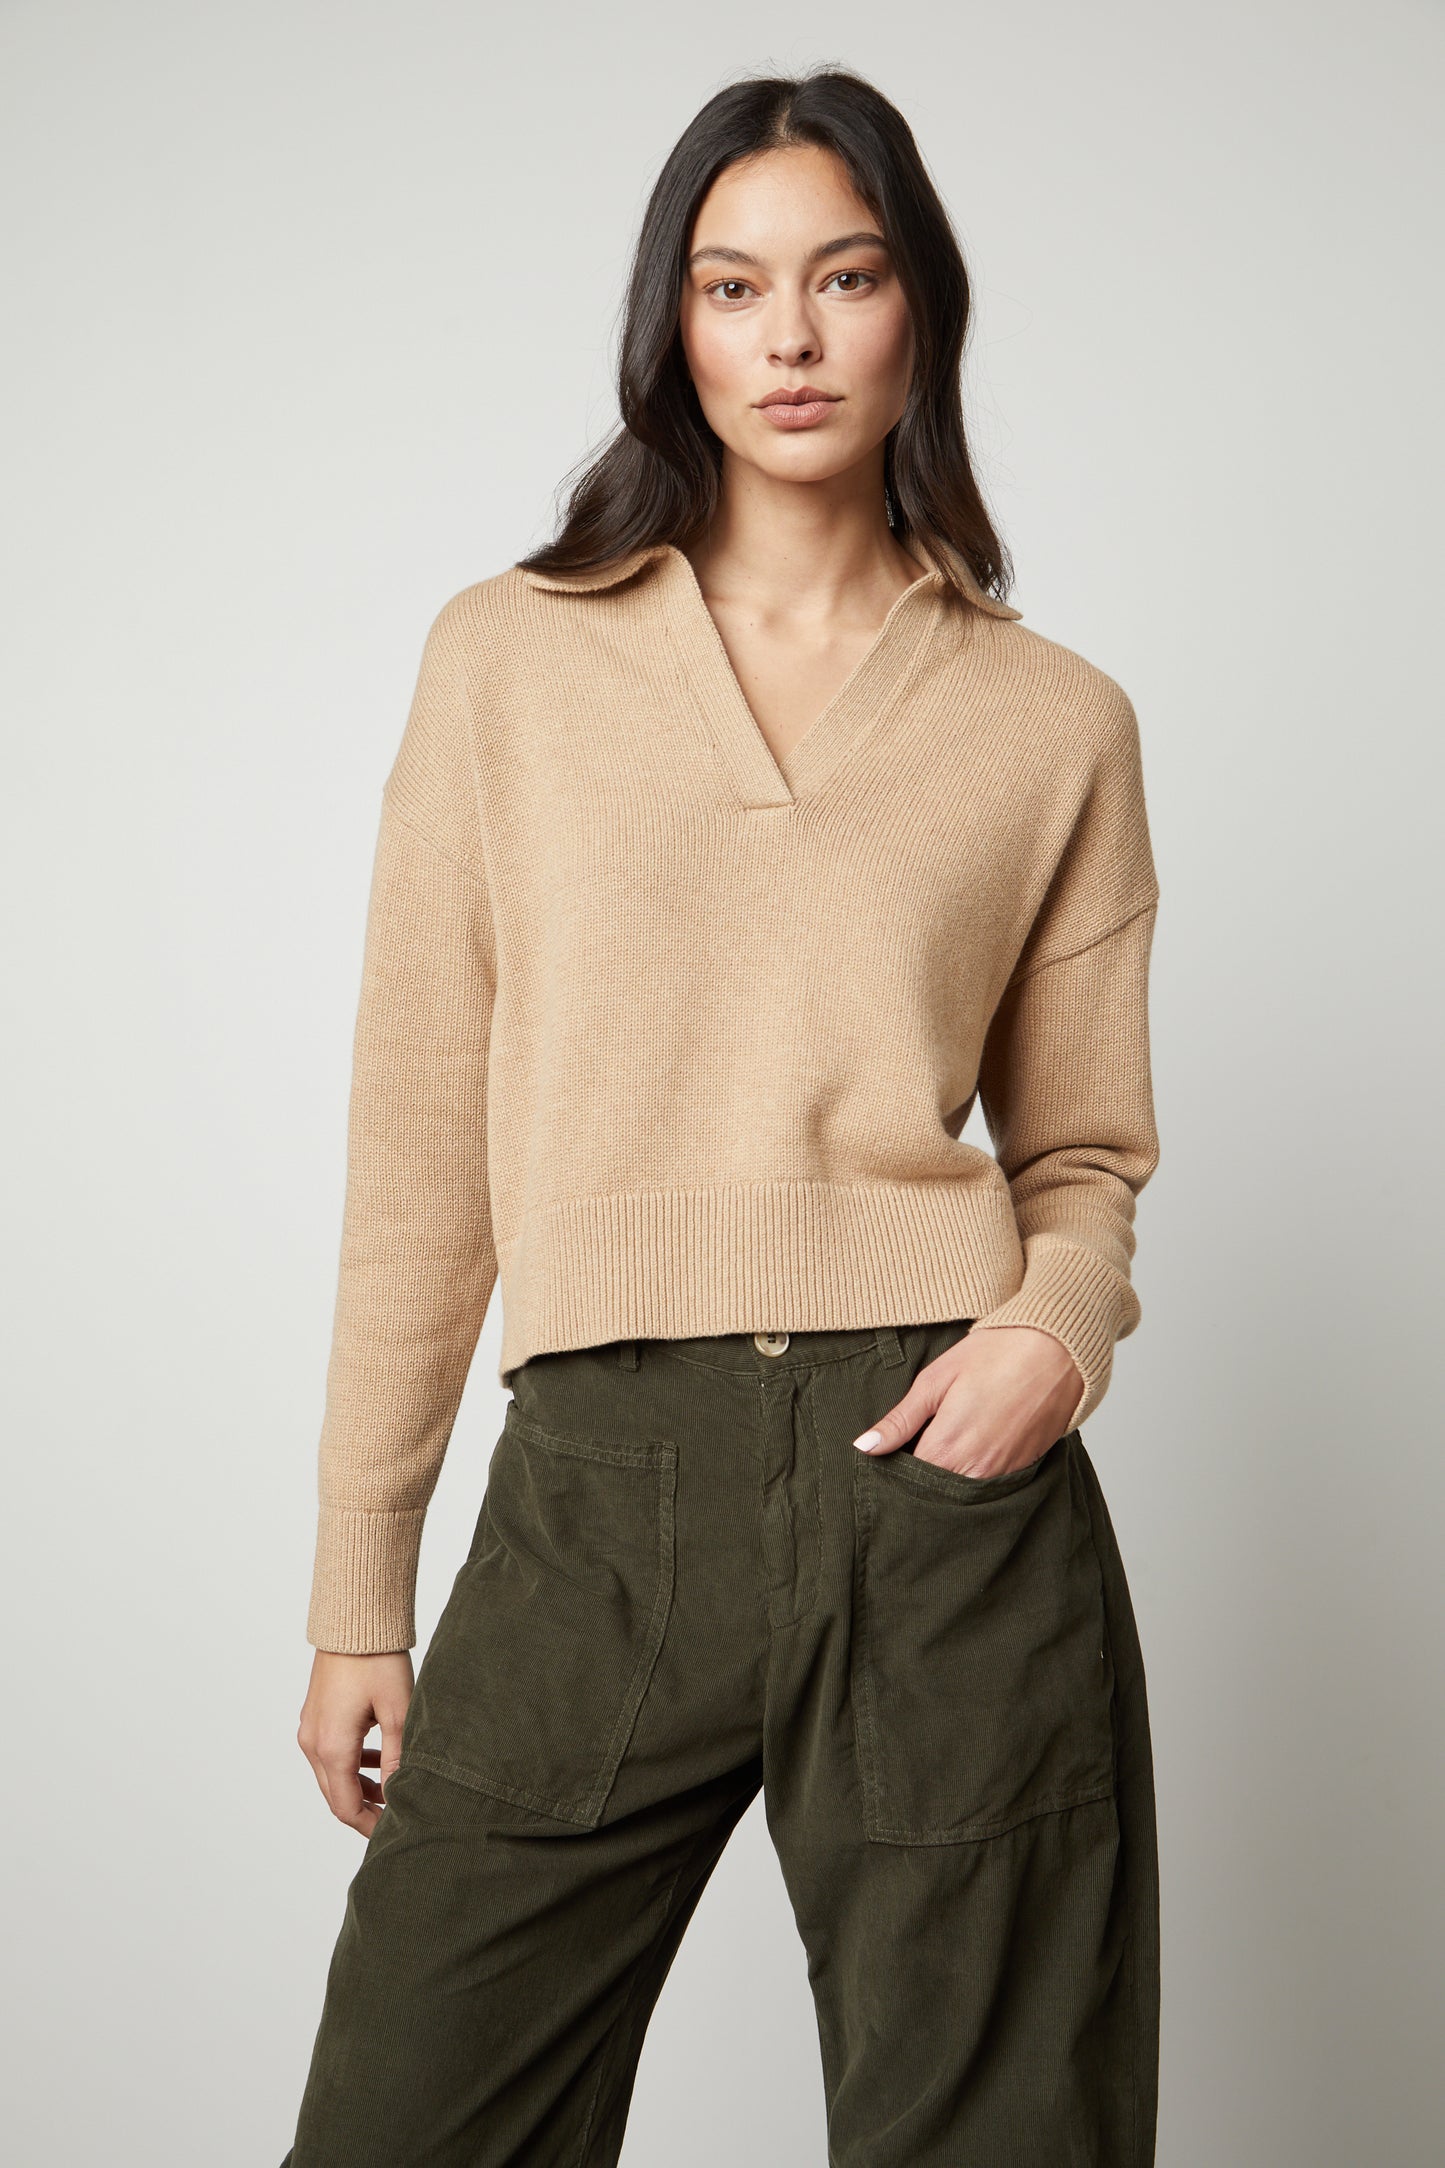 LUCIE TOP IN CAMEL